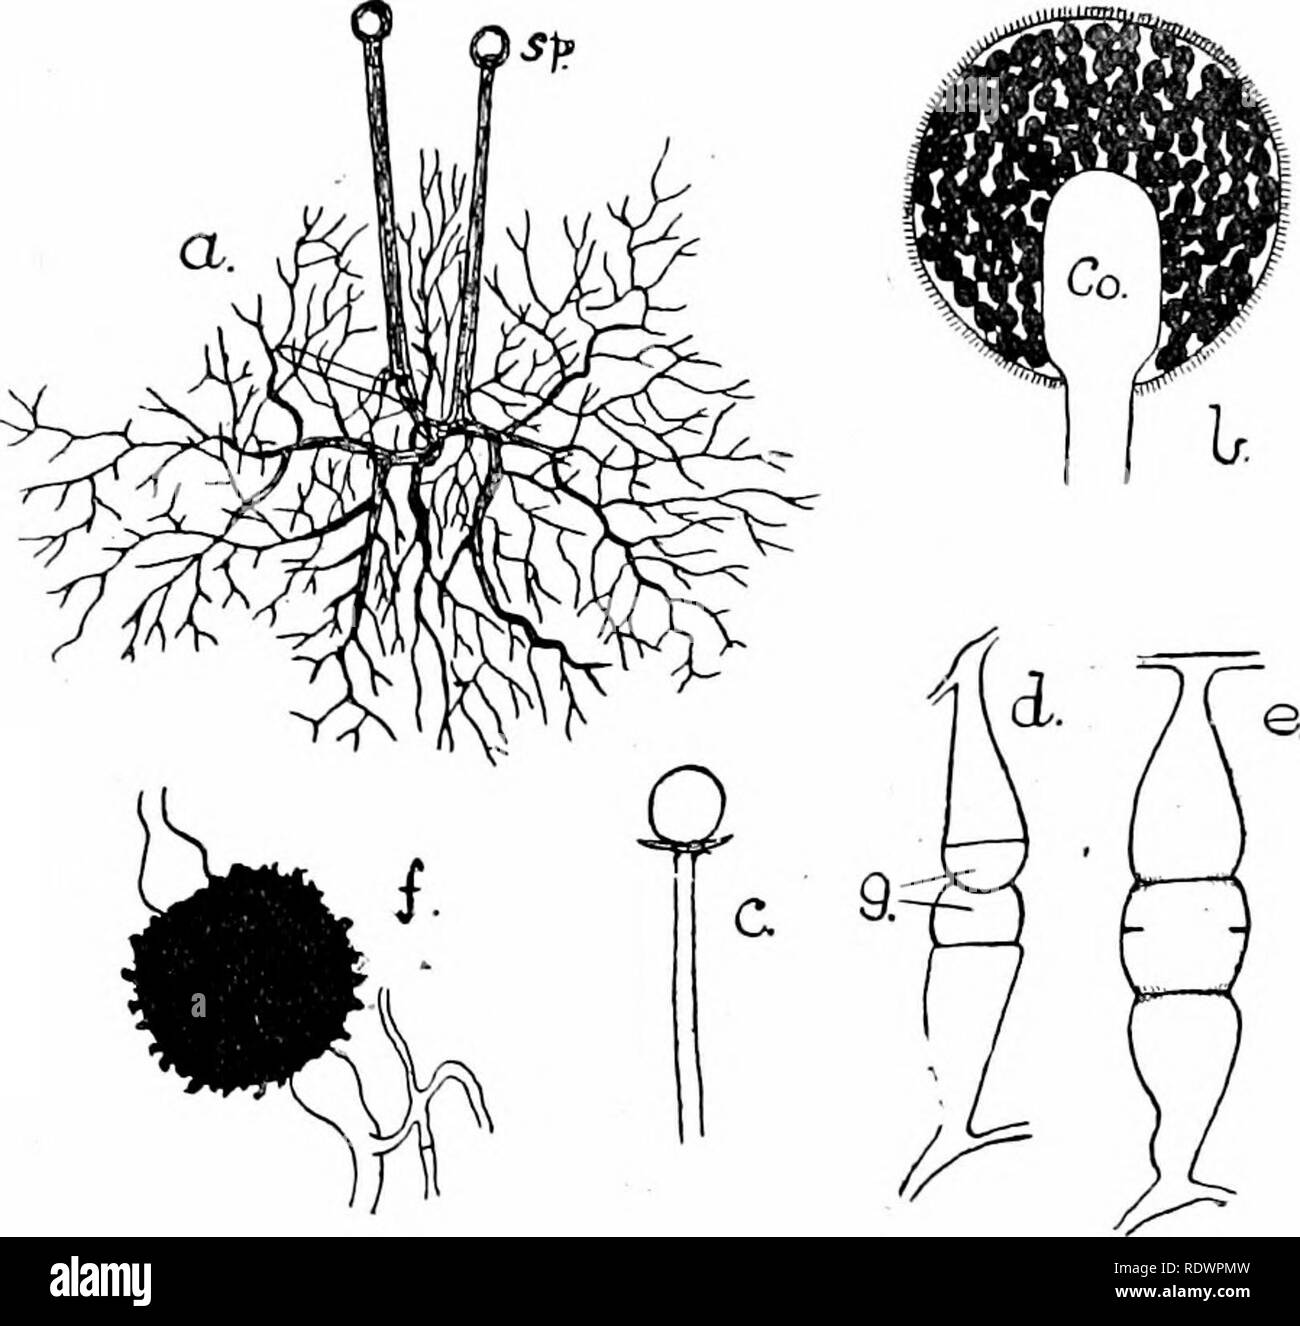 . An introduction to the structure and reproduction of plants. Plant anatomy; Plants. MUCOR 237 later conspicuous, dark brown or black, spherical sponmgia {sp.) appear at the ends of relatively thick upright hyphre, which in some species are branched. An ally of Miicor [Rhizopus stolonifer), that occurs very commonly on stale bread and horse dung, spreads very rapidly by hypha resembling. Fig. 125.—Mucor. a, mycelium, slightly magnified, showing two of the long-stalked sporangia (sp.) ; 6, sporangium, much enlarged, in optical section, showing the numerous spores and the central column (Co.) ; Stock Photo